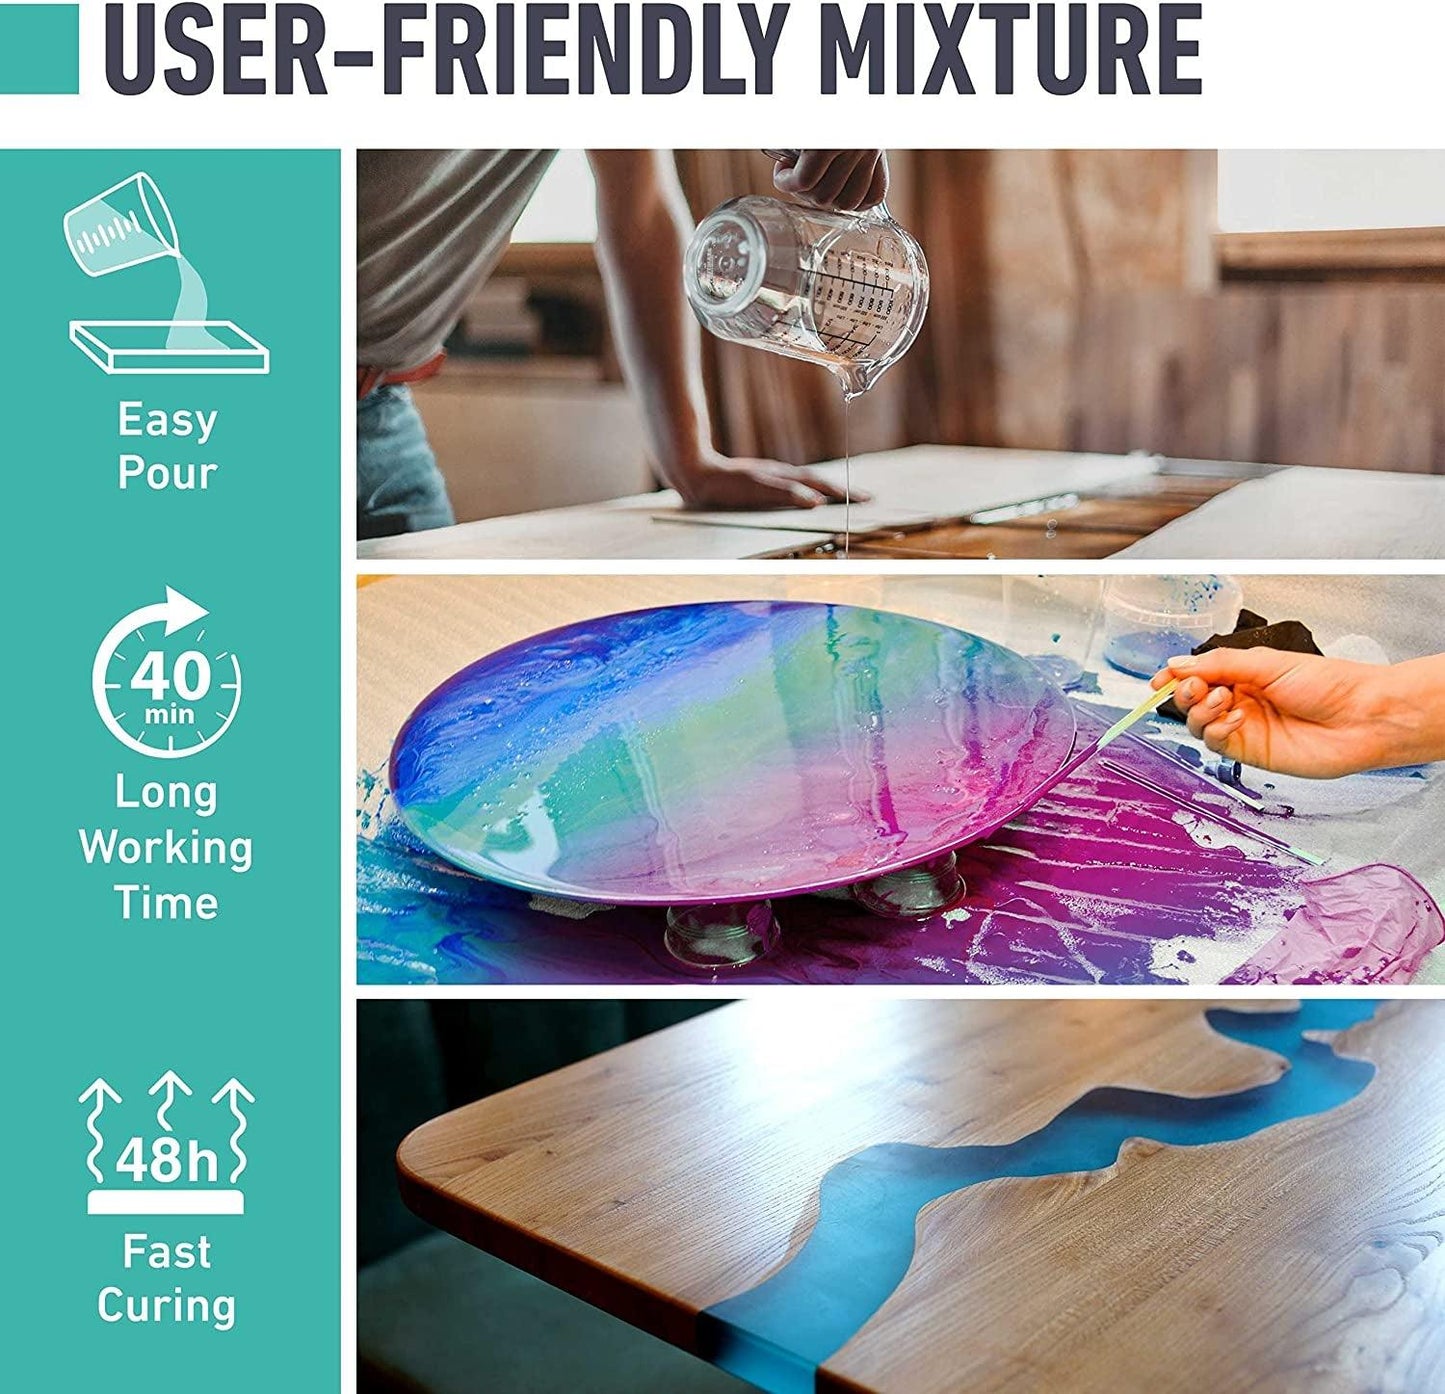 Epoxy Resin Kit, 1 Gallon High-Performance Self-Leveling, Crystal Clear and Ultra-Glossy, Perfect for Table Tops, Crafts - WoodArtSupply